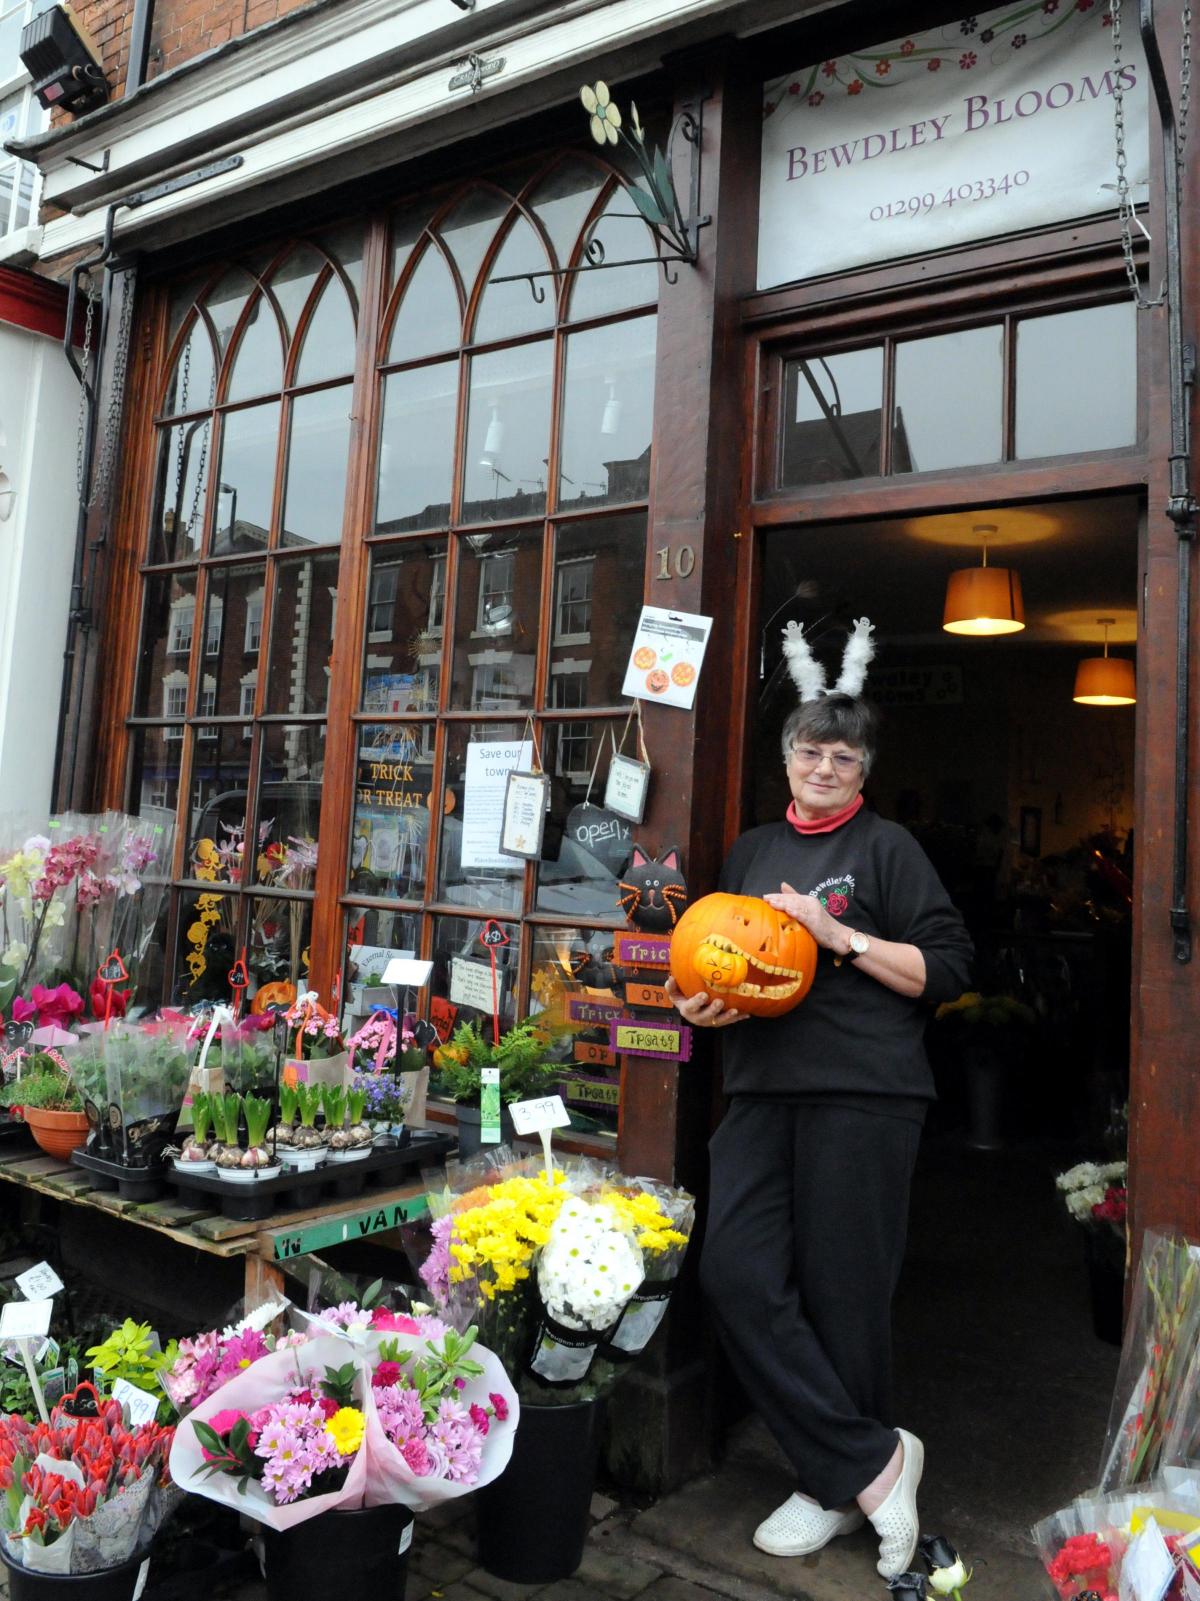 Jo Latimer from Bewdley Blooms, with their pumpkin window display